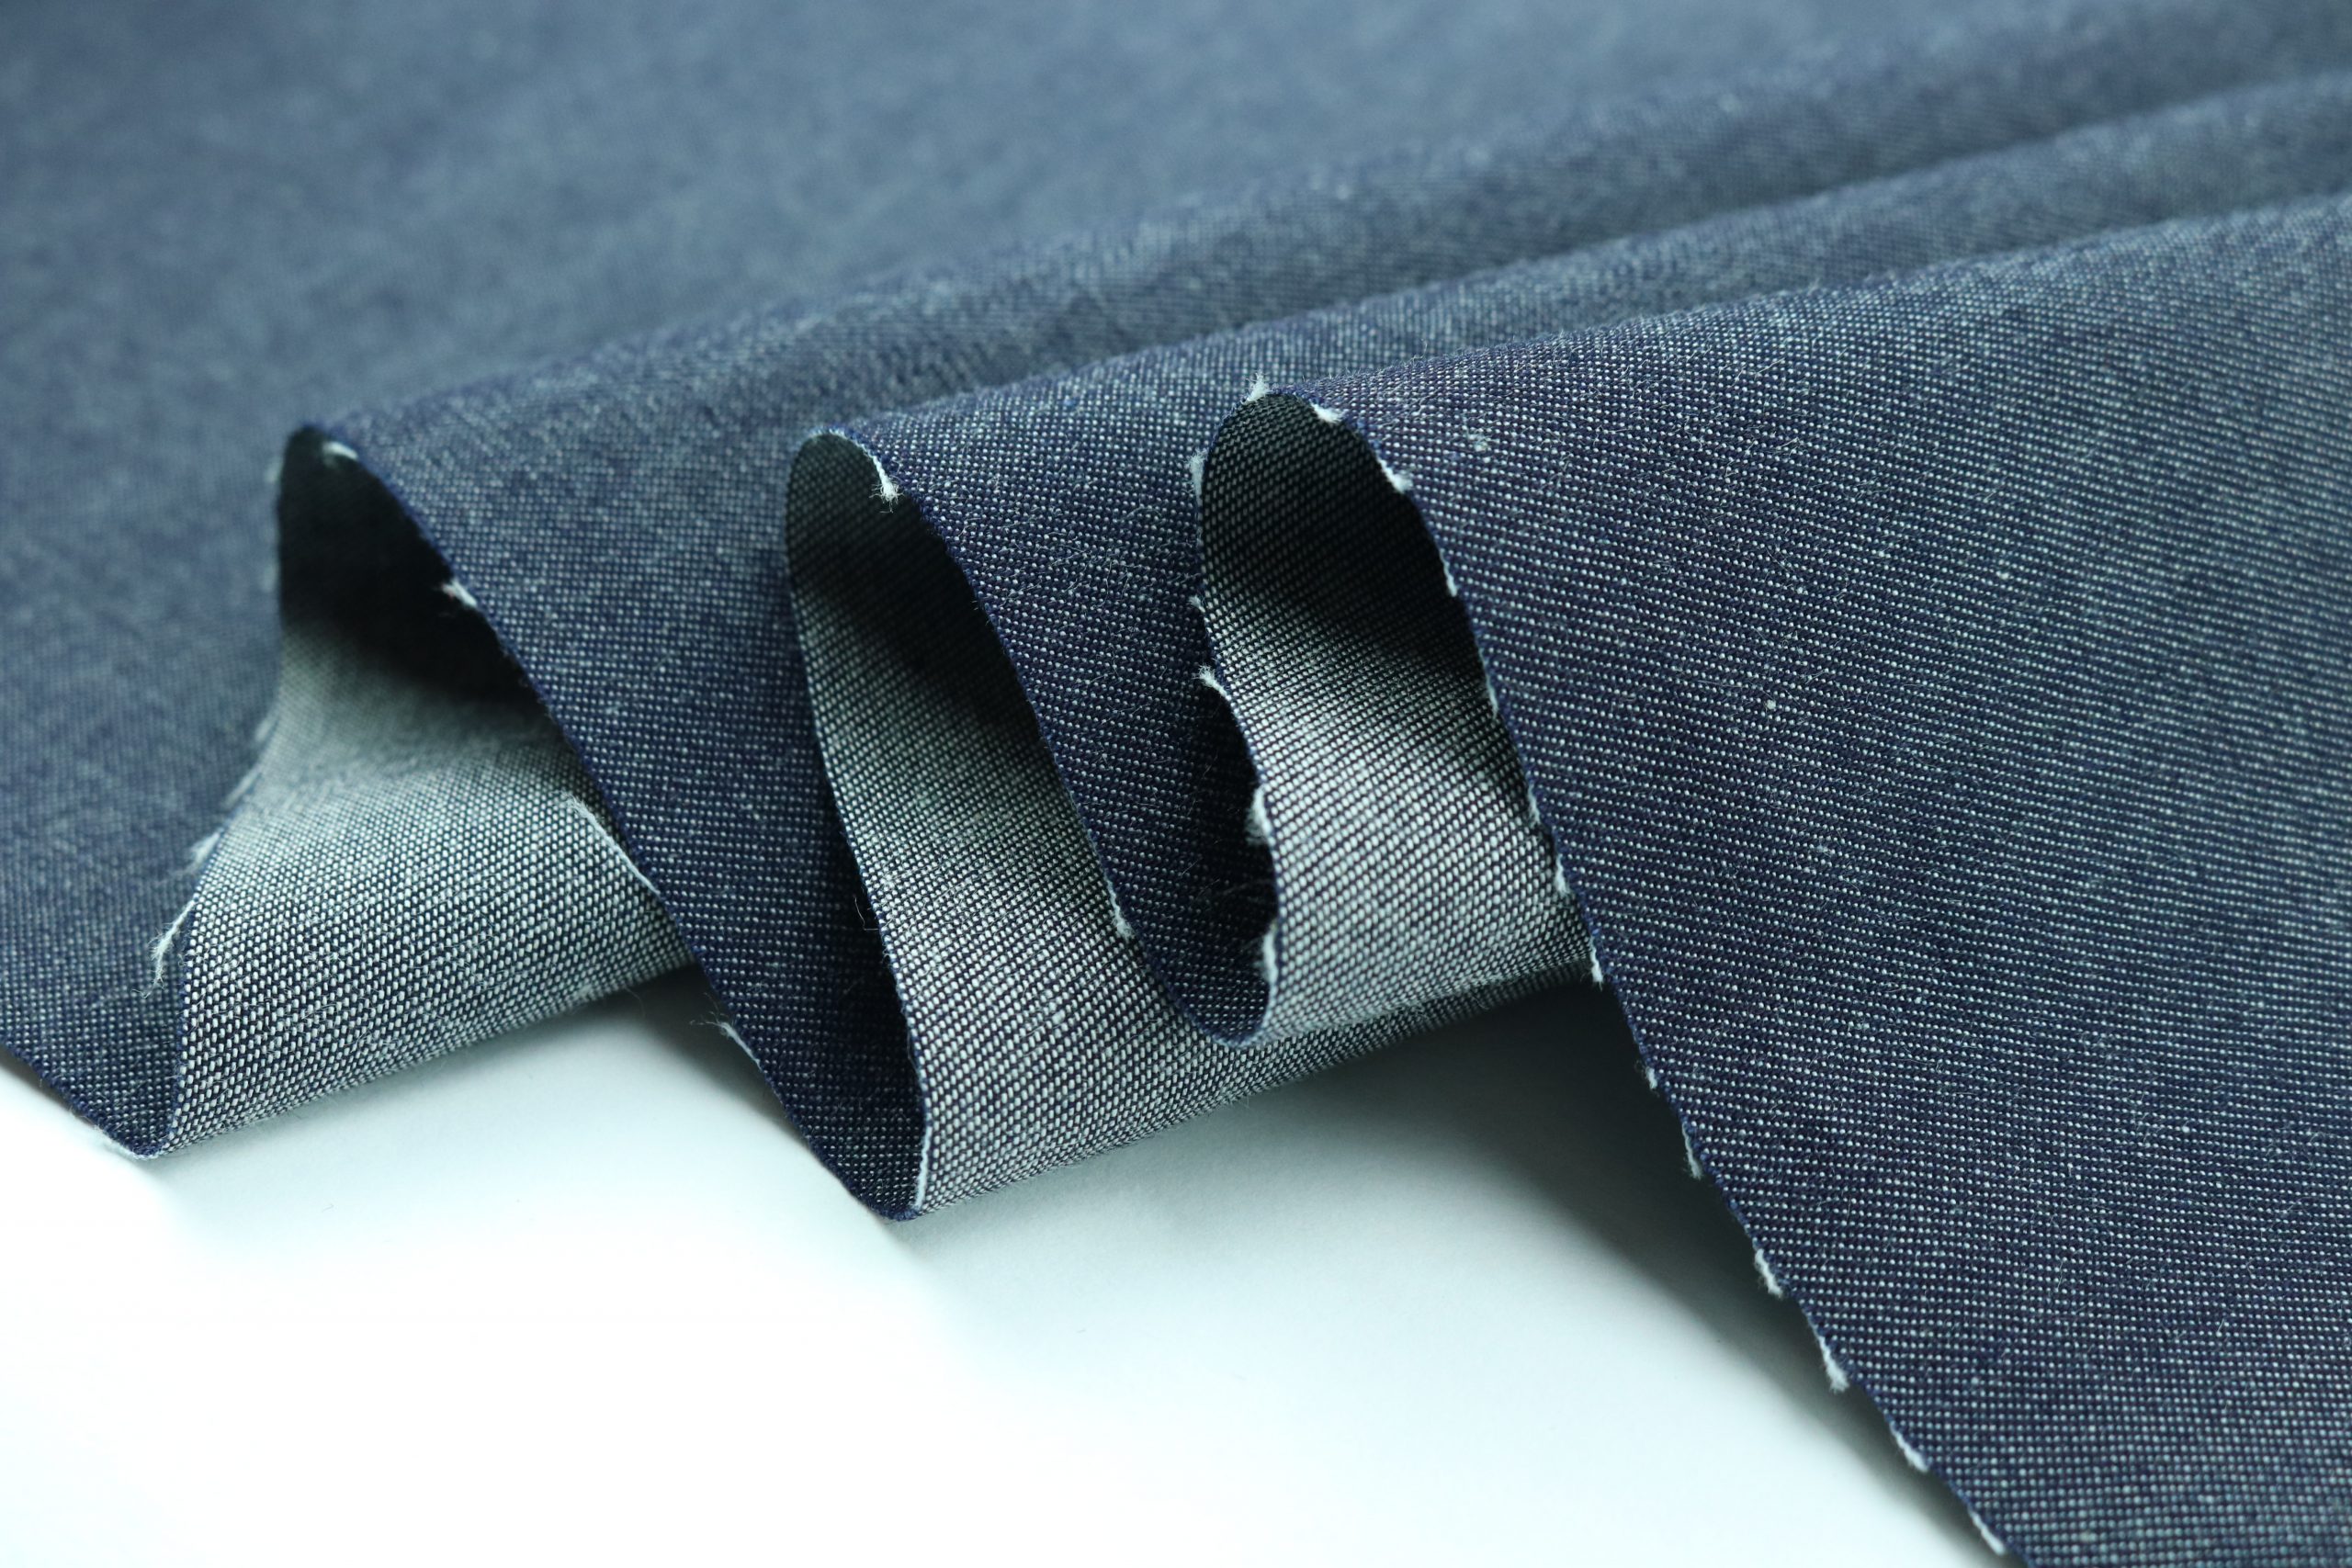 Denim Fabric – how its made, types and usages - Times of Textile